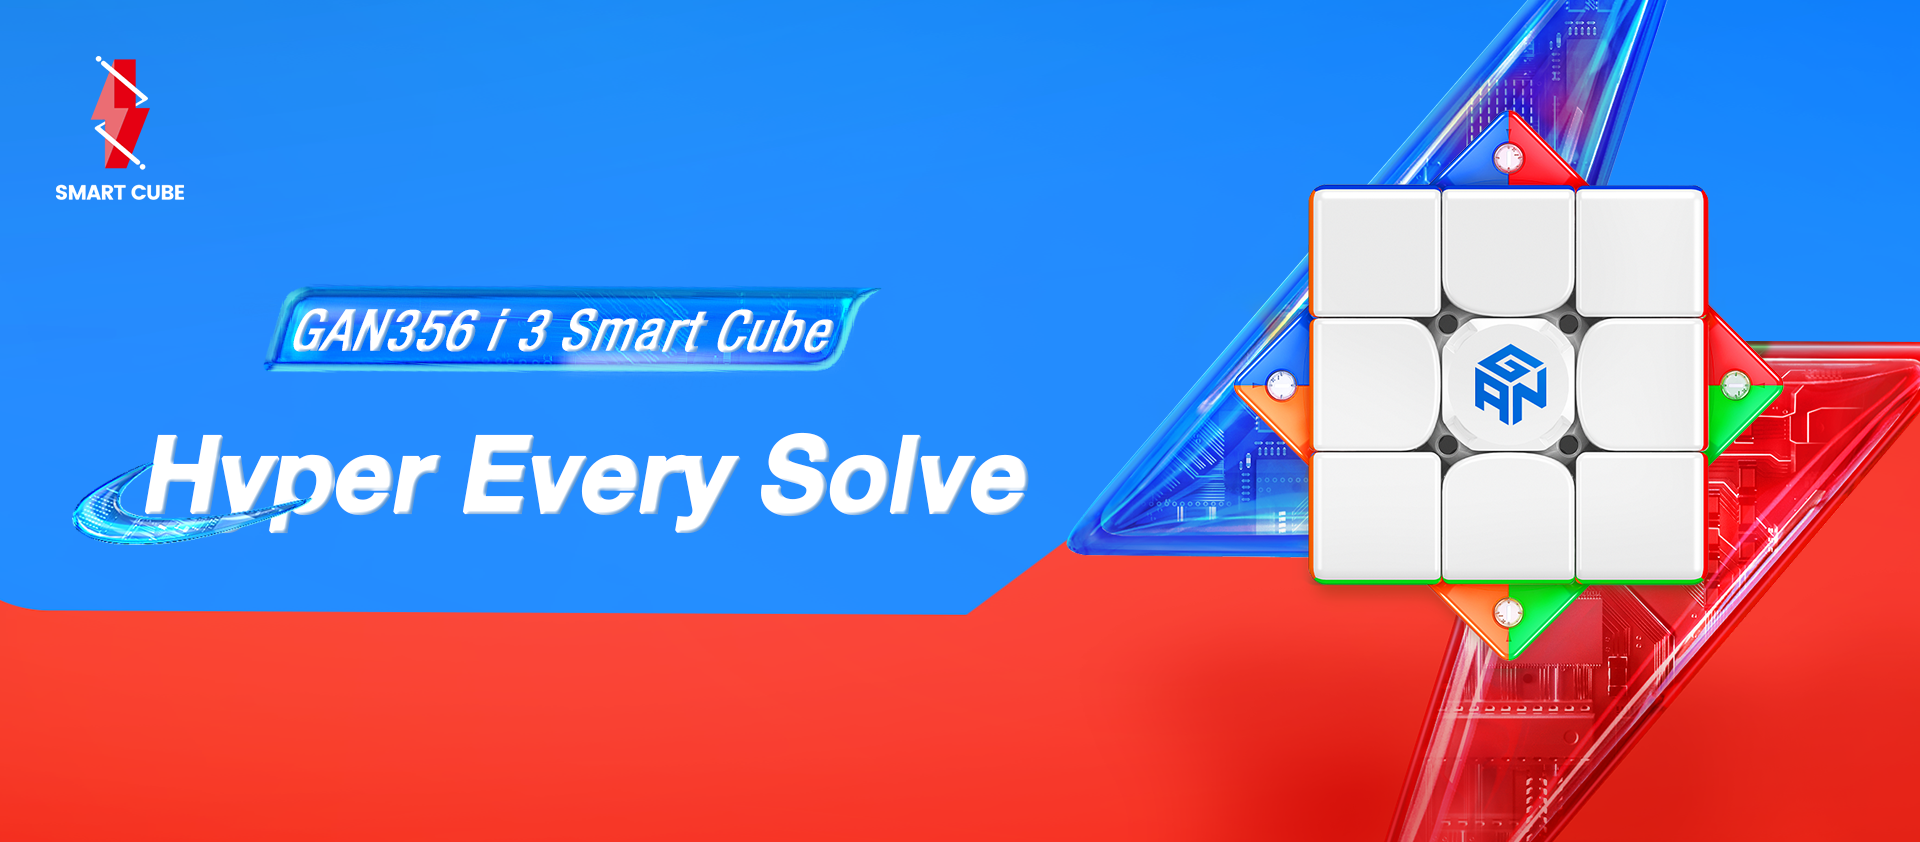 1x1x1 Rubik's Cube Solver and Simulator Online